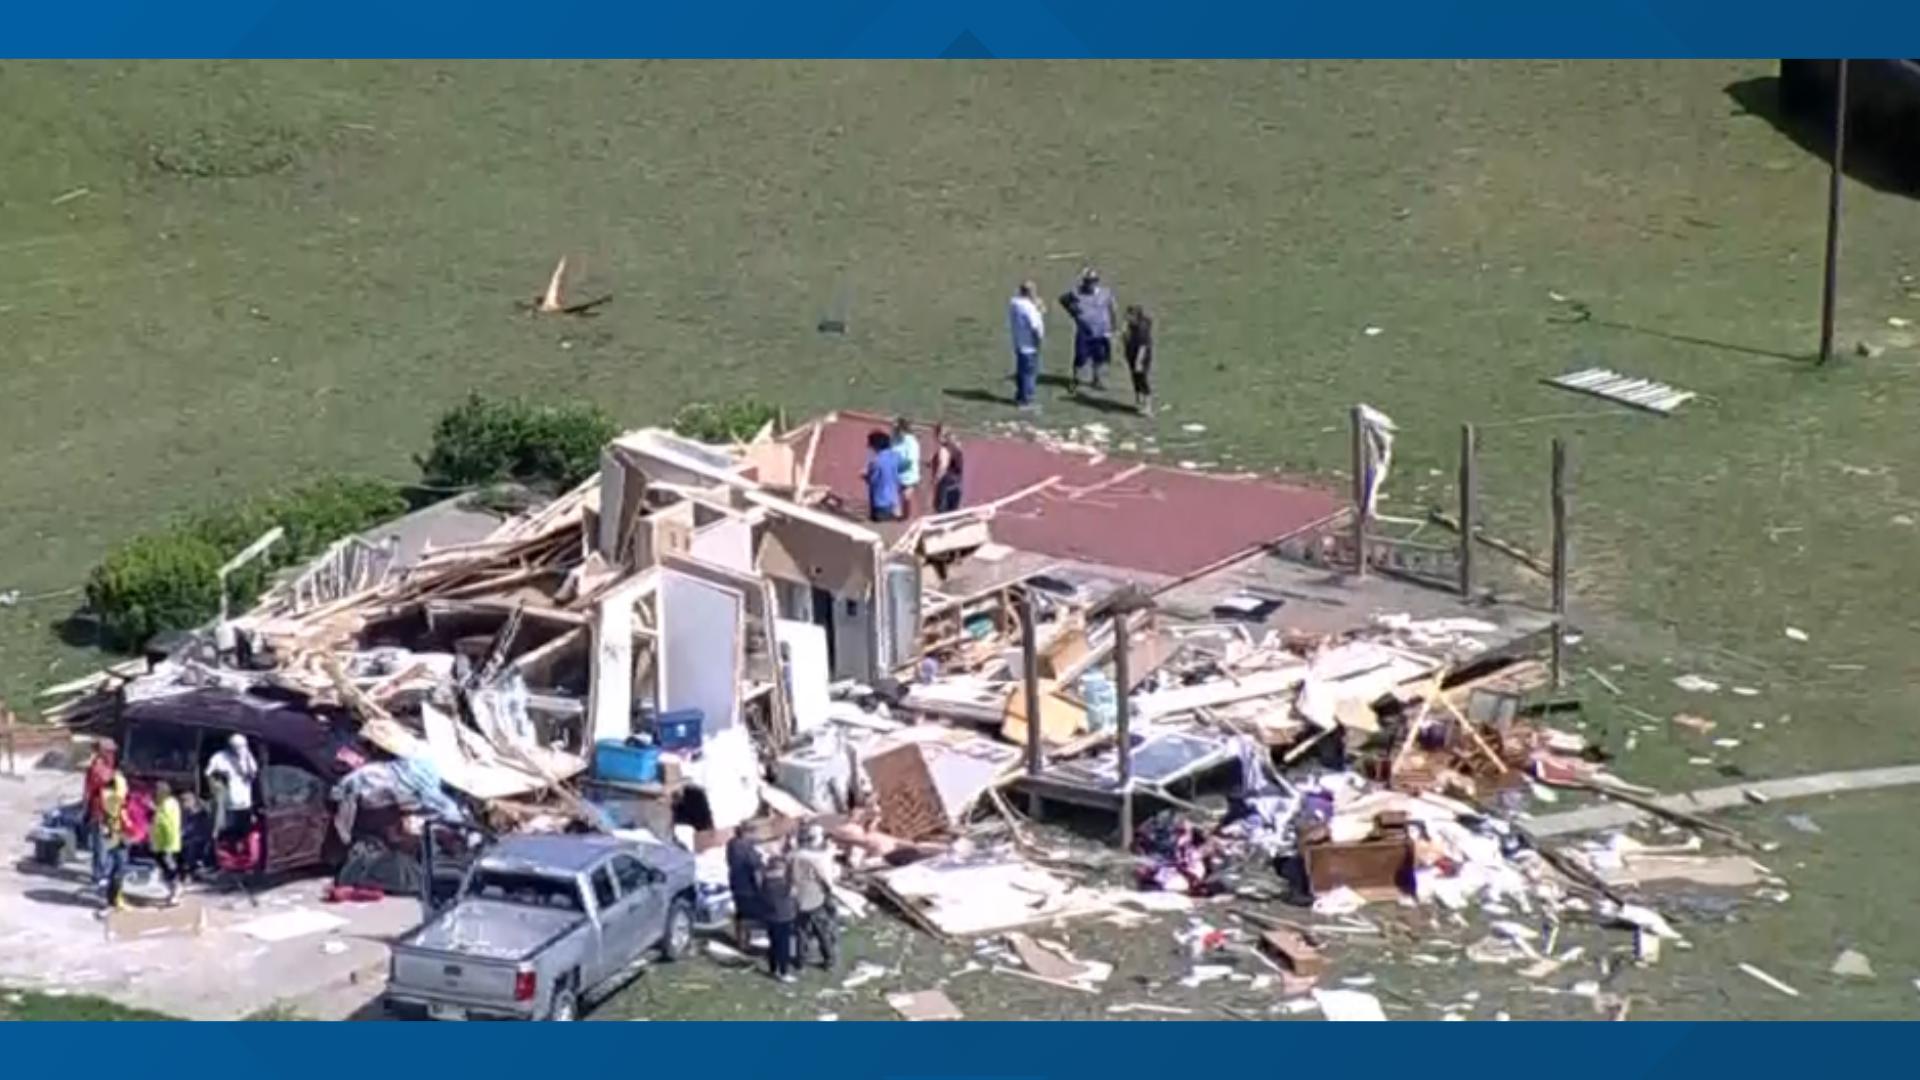 A reported tornado destroyed homes in Collin County, Texas last night.